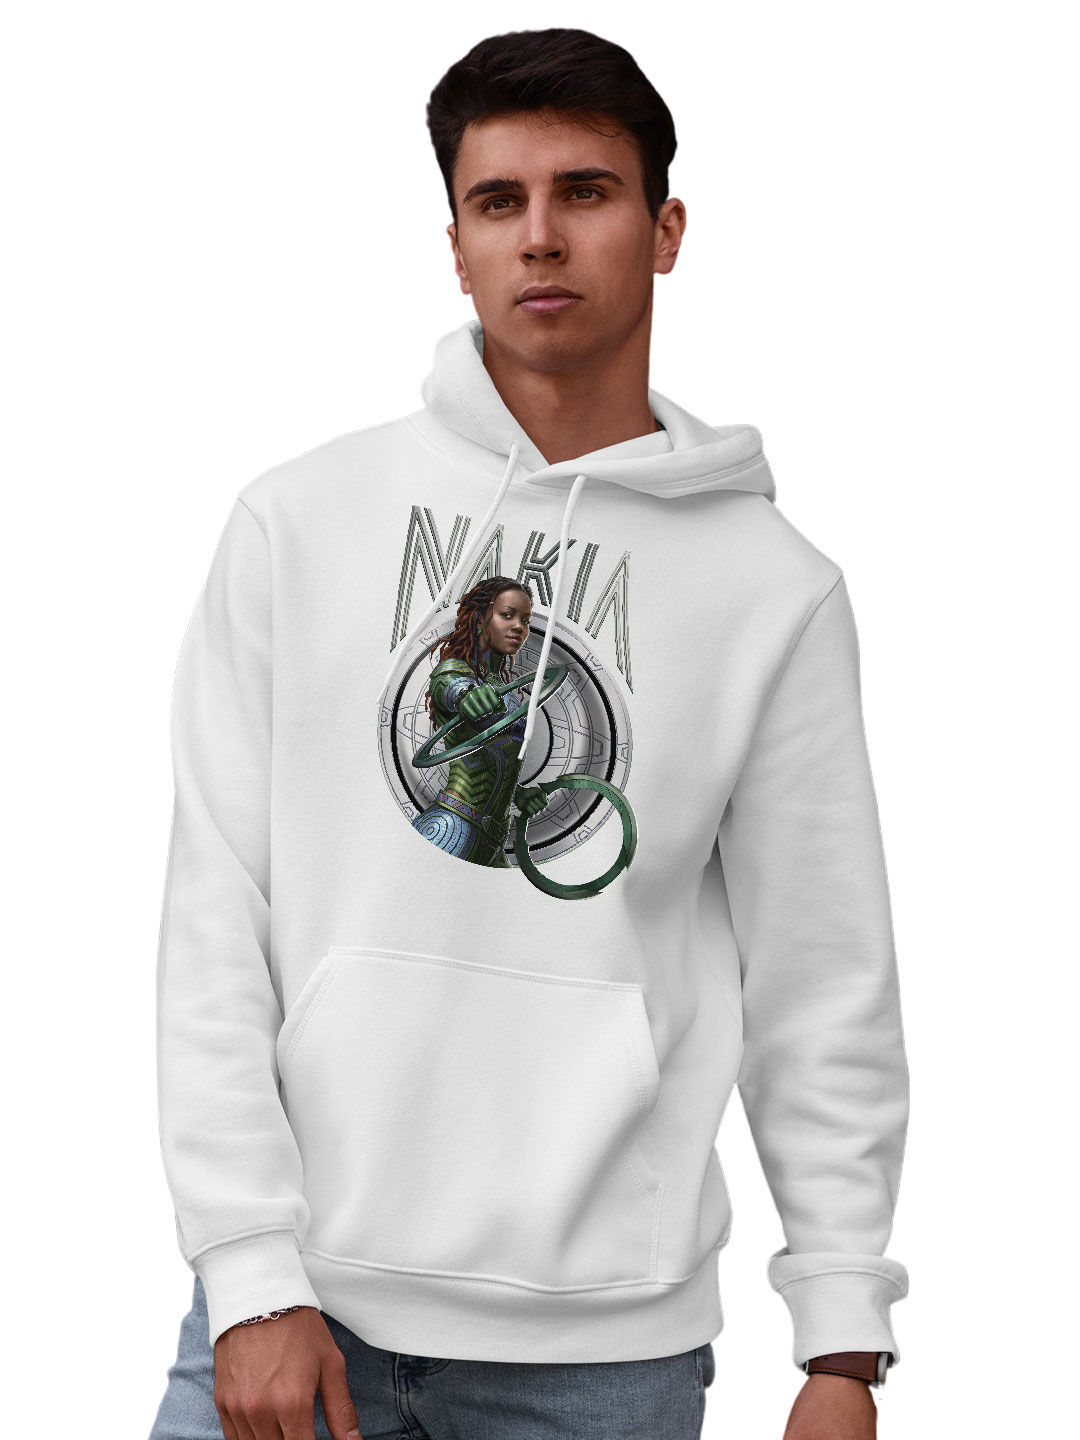 A man in a hoodie is posing for a picture Image & Design ID 0000121207 -  SmileTemplates.com